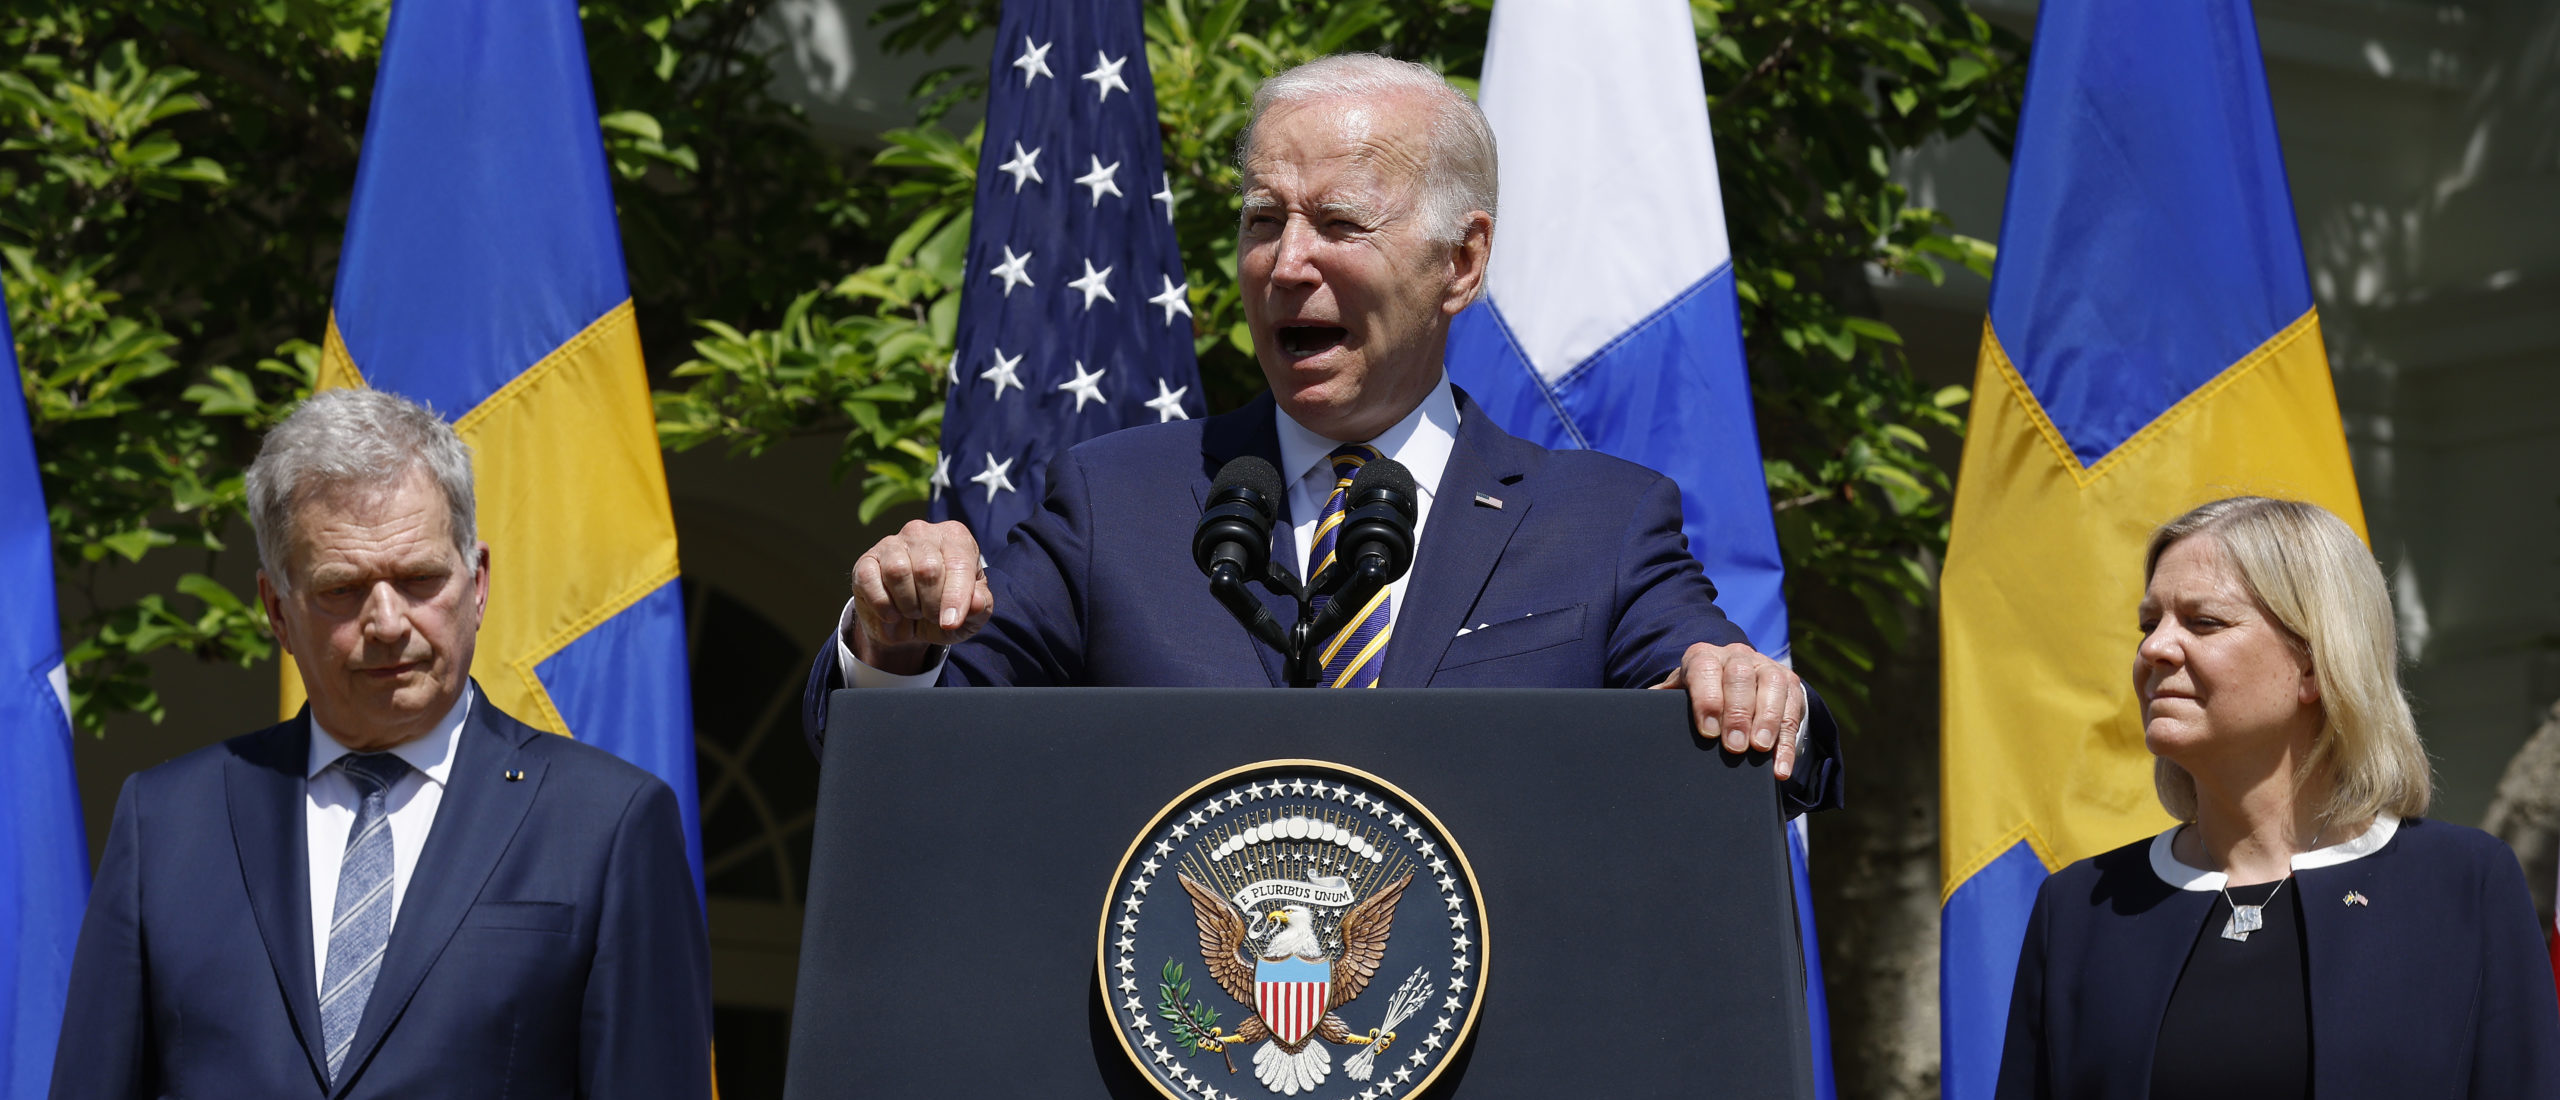 U.S. President Joe Biden (C) delivers remarks with Finland's President Sauli Niinisto (L) and Sweden's Prime Minister Magdalena Andersson in the Rose Garden at the White House on May 19, 2022 in Washington, DC. (Photo by Chip Somodevilla/Getty Images)